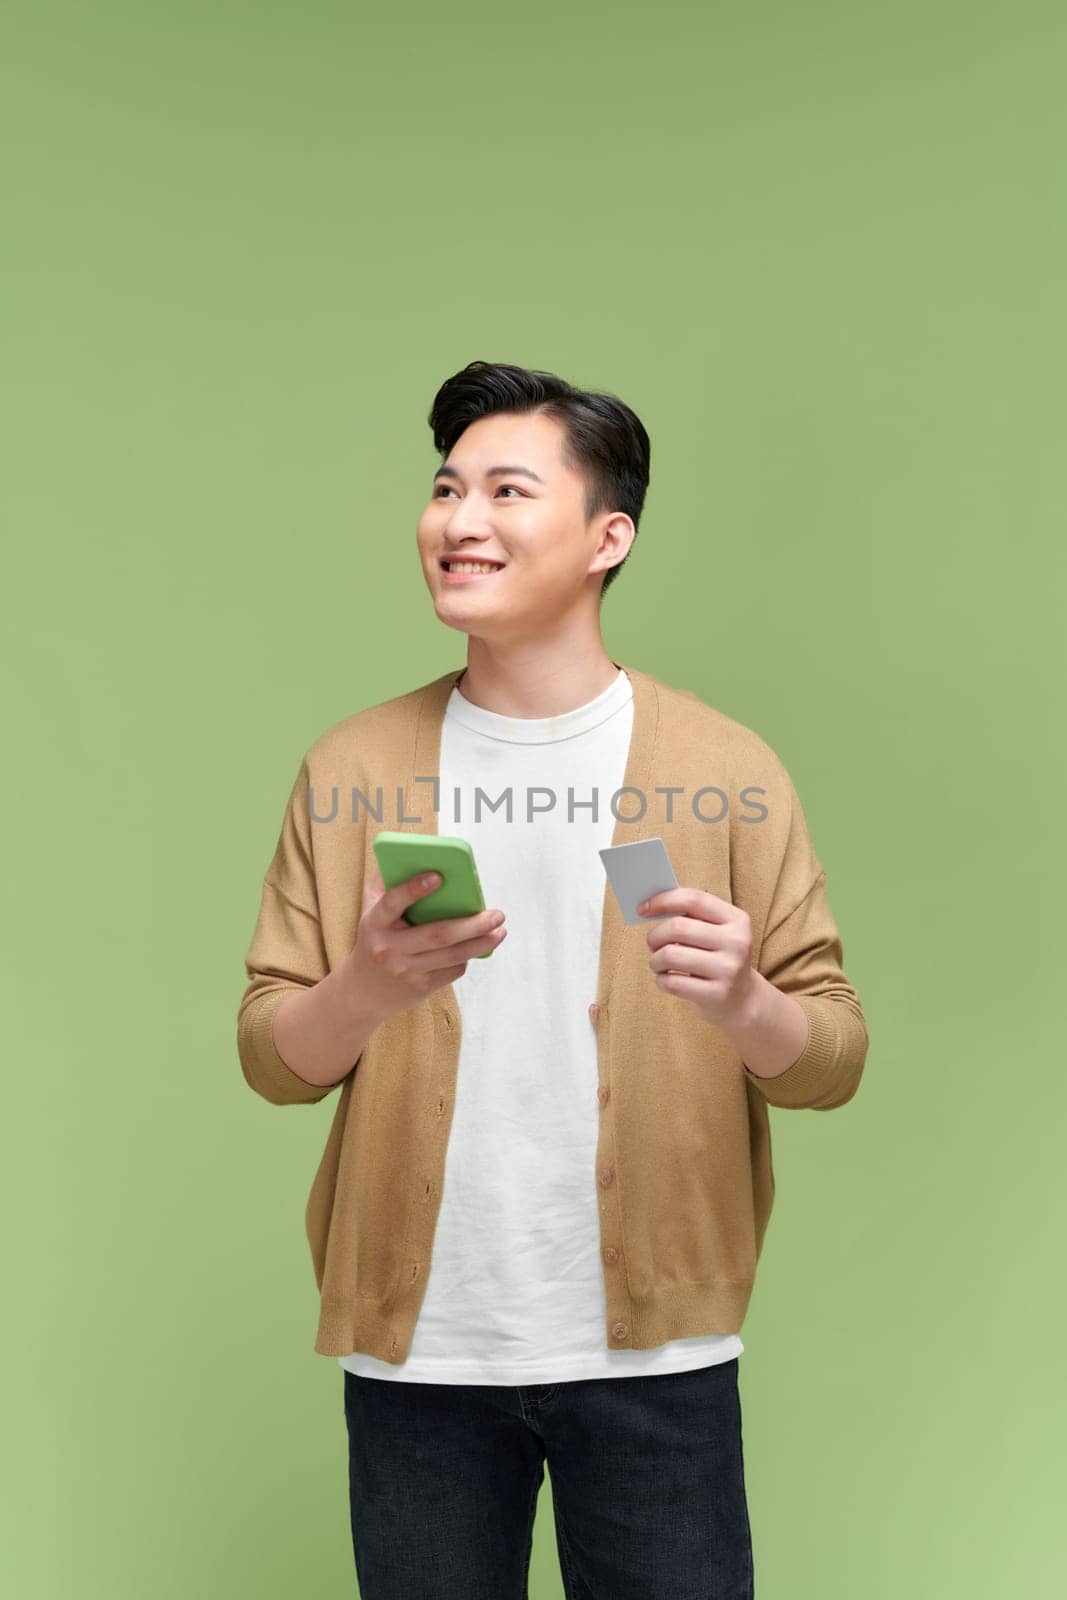 Smiling man holding credit card and mobile phone while standing against green background